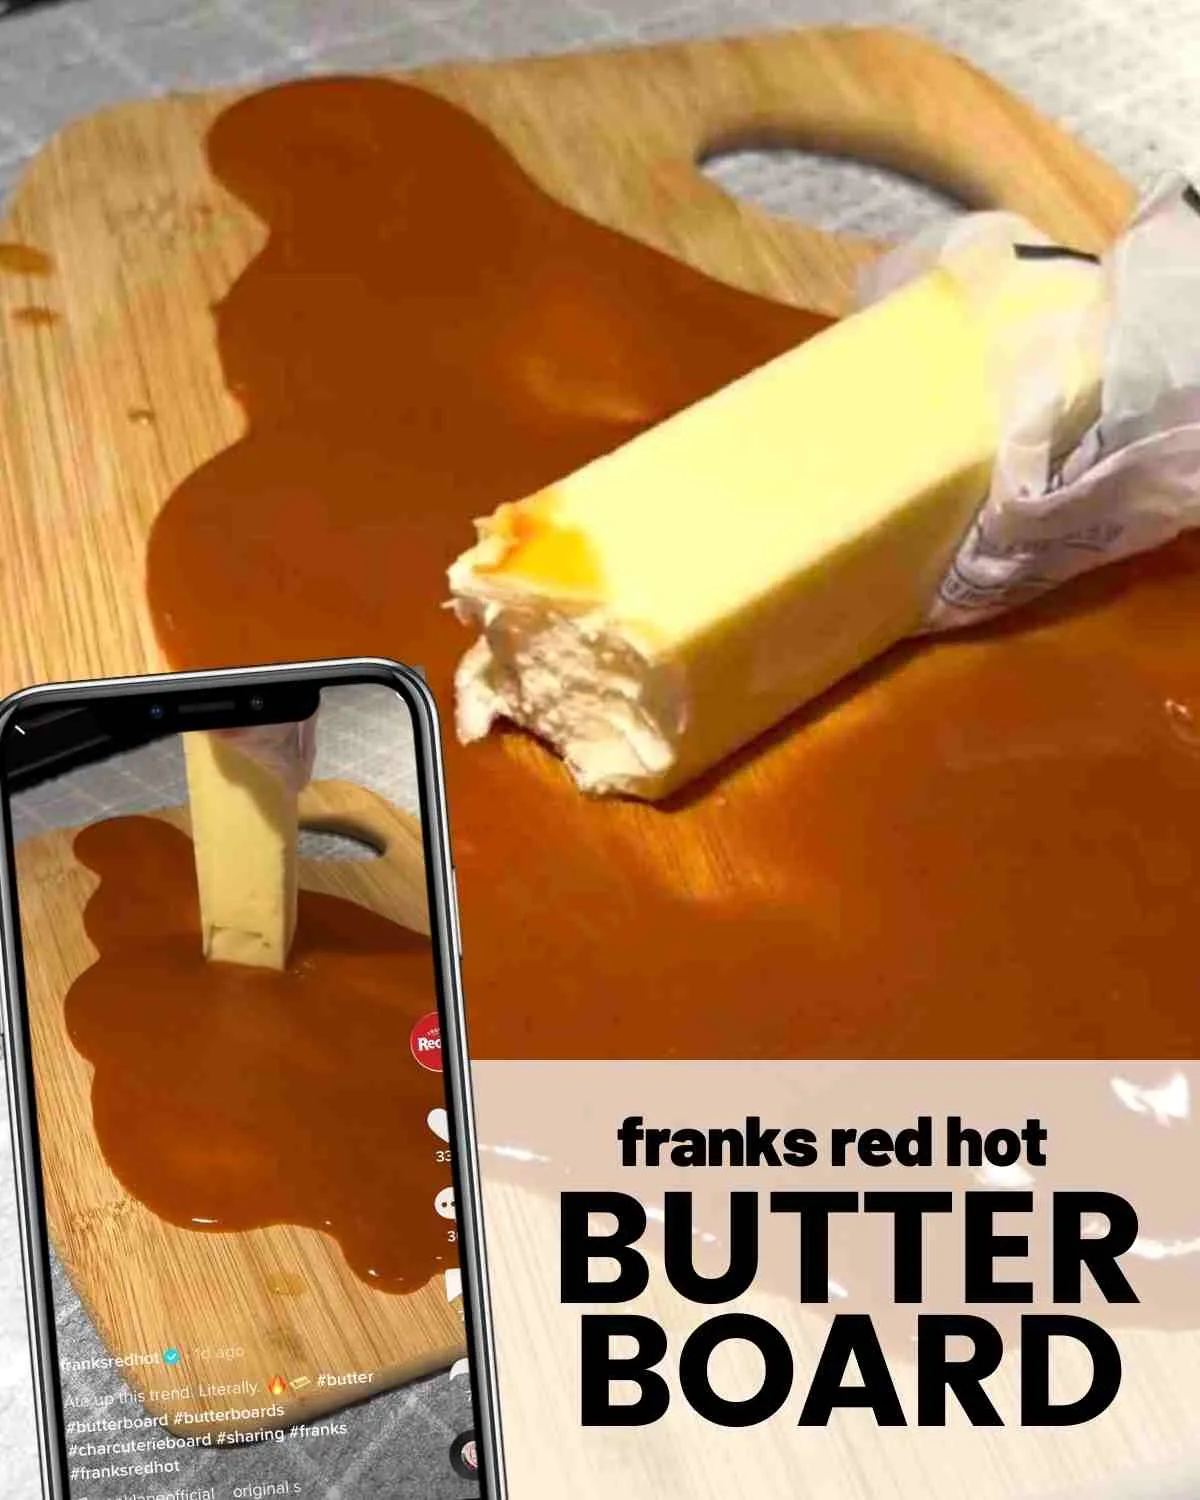 franks red hot butter board recipe